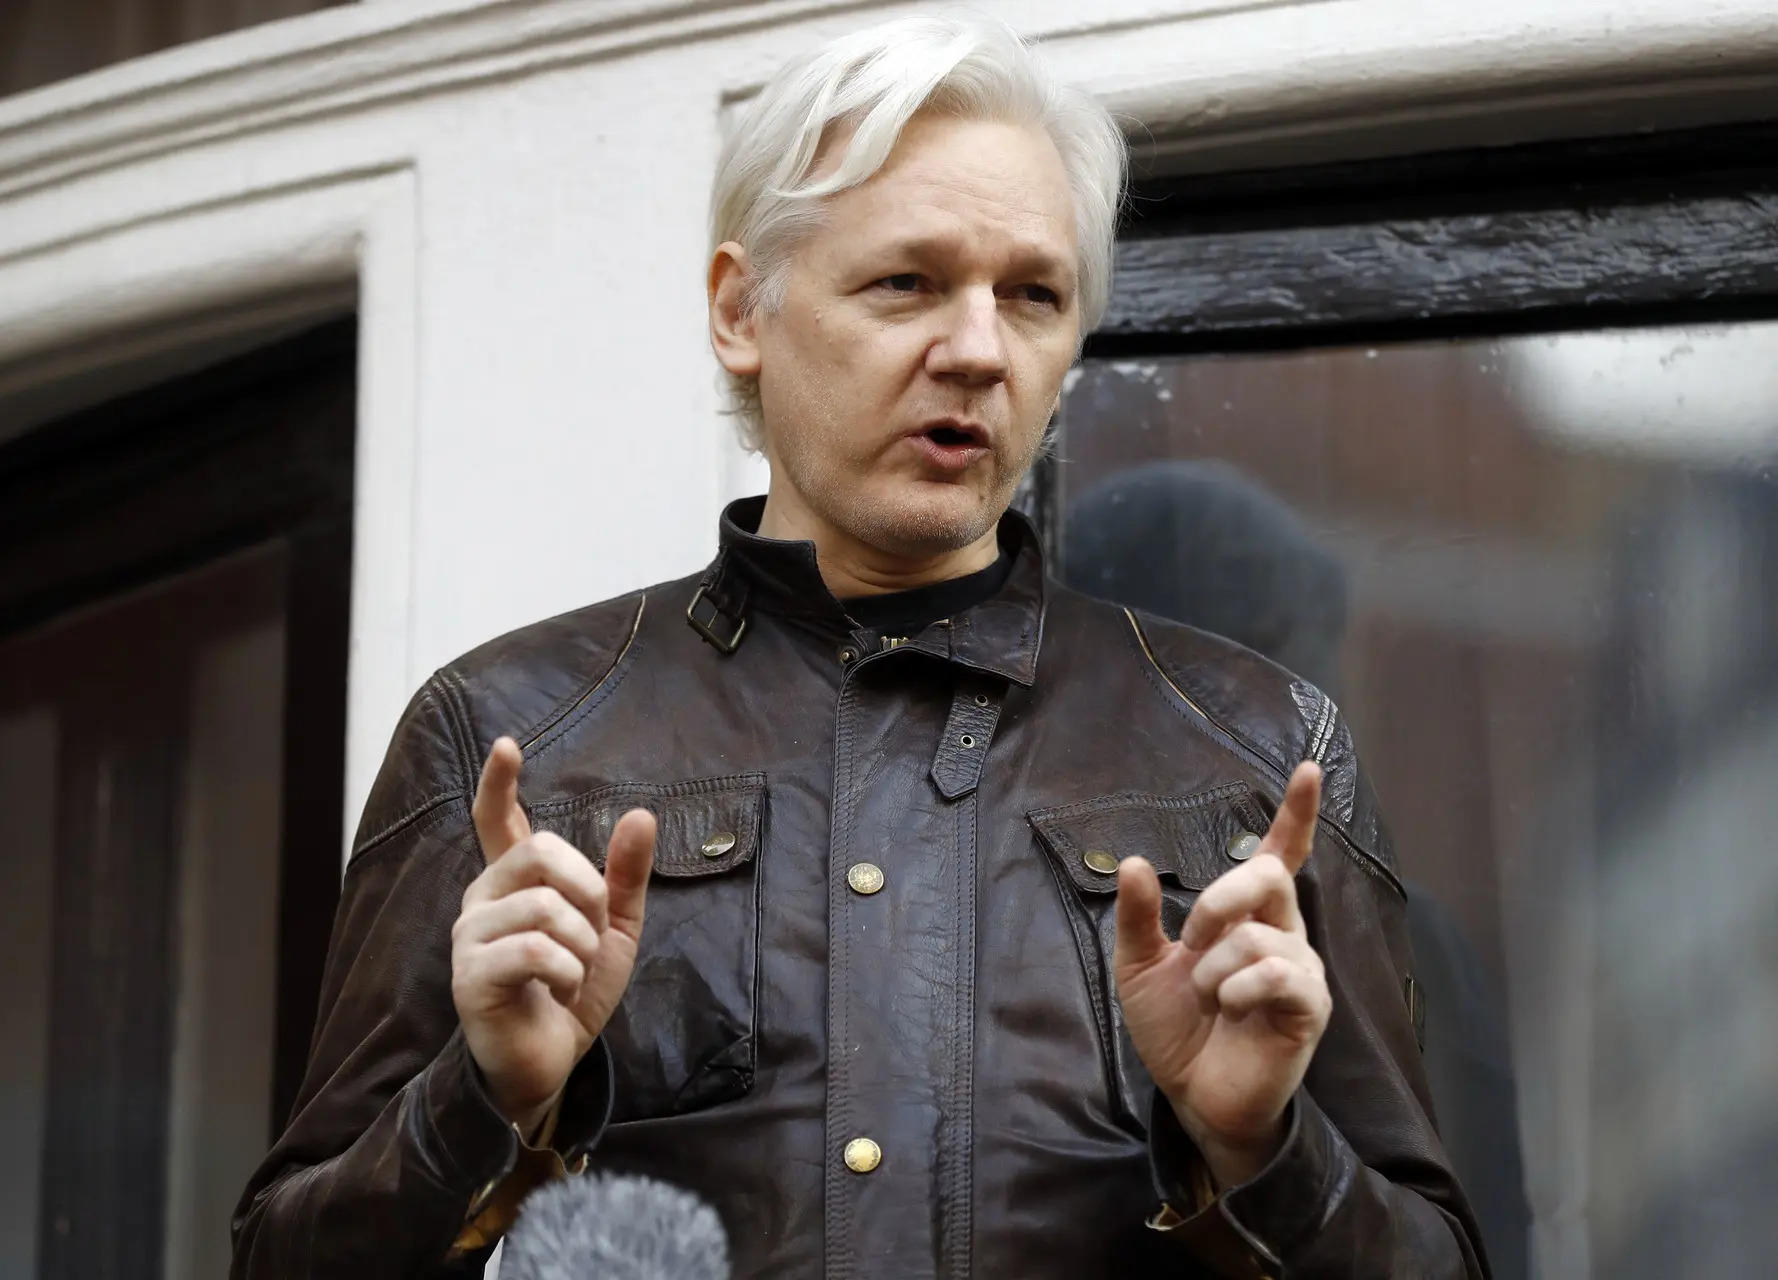 WikiLeaks founder Julian Assange to plead guilty in espionage act case in US court, will be freed from prison 